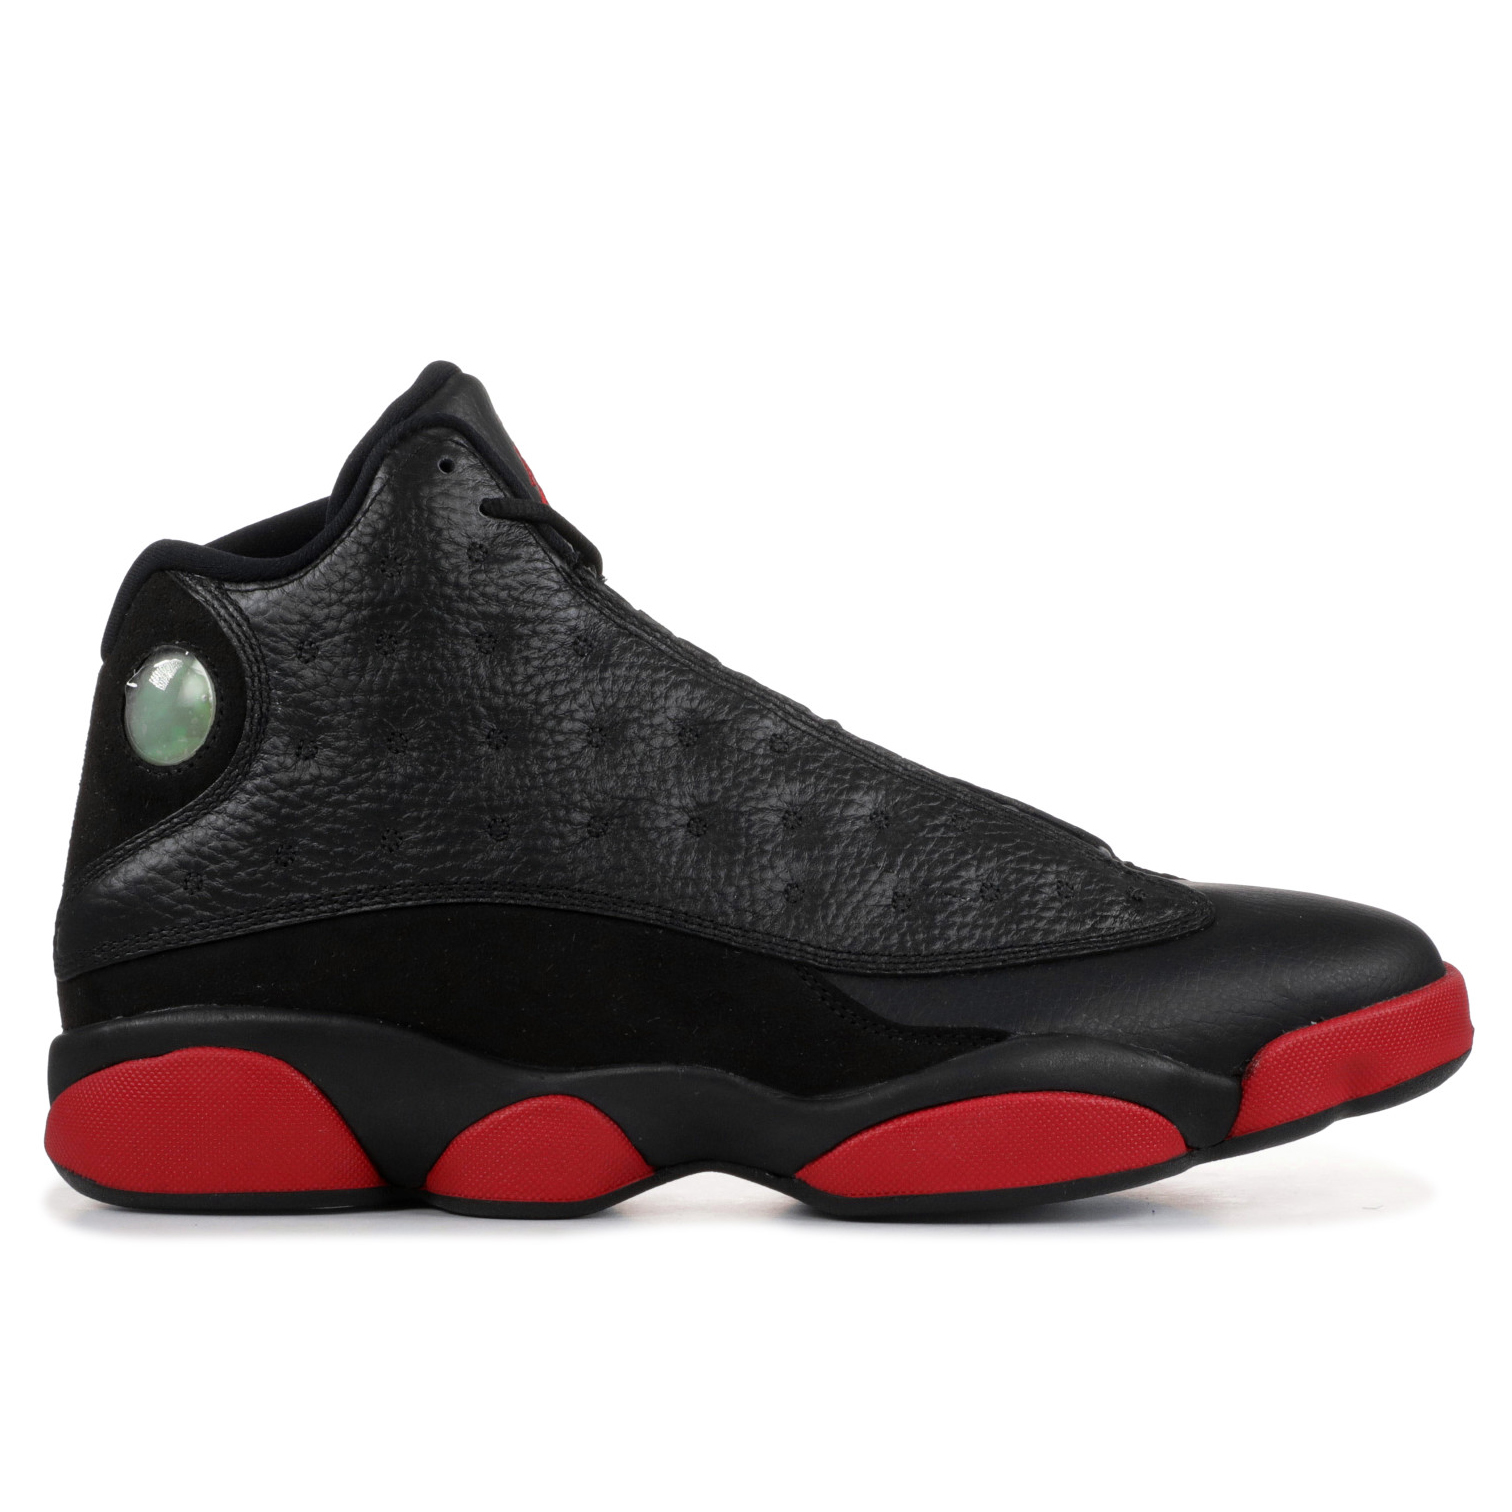 US$ 51.00 - Gym red Jordan Retro Dirty Bred 13s Basketball Shoes - www ...